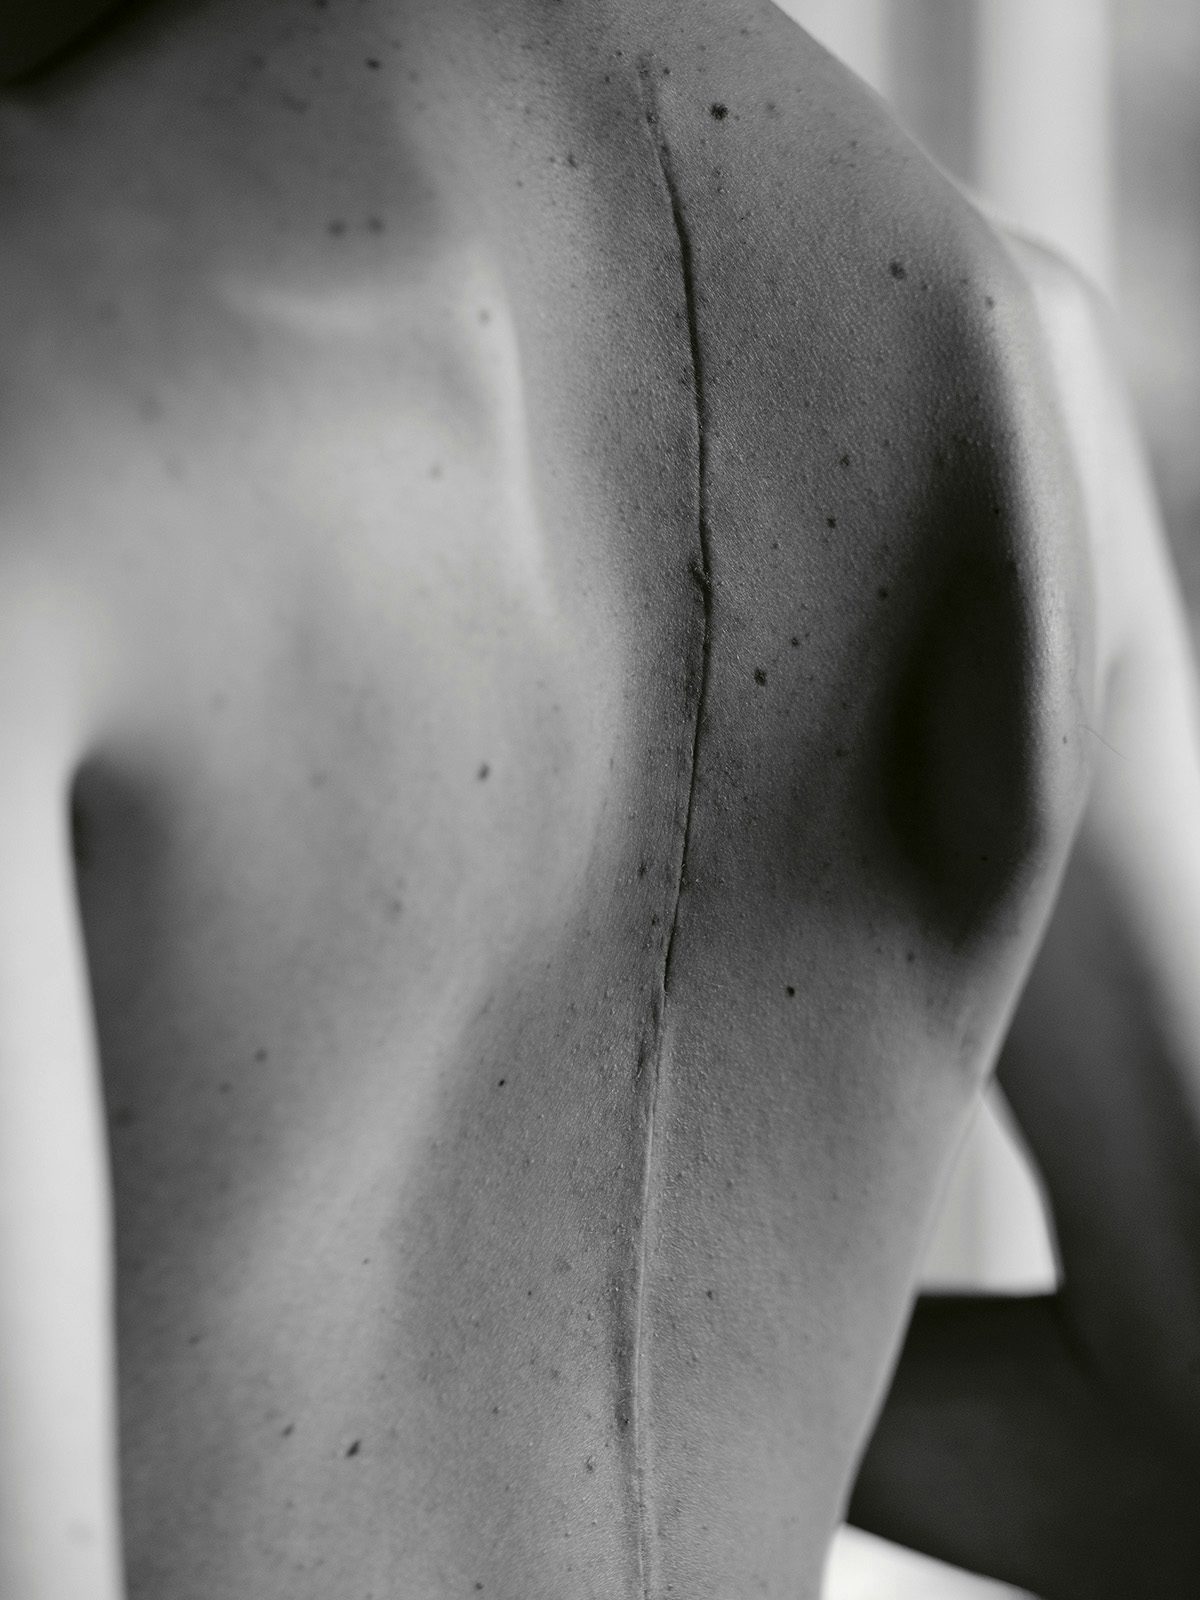 Black and white close-up photo of a boy's back which has a large vertical scar running down it